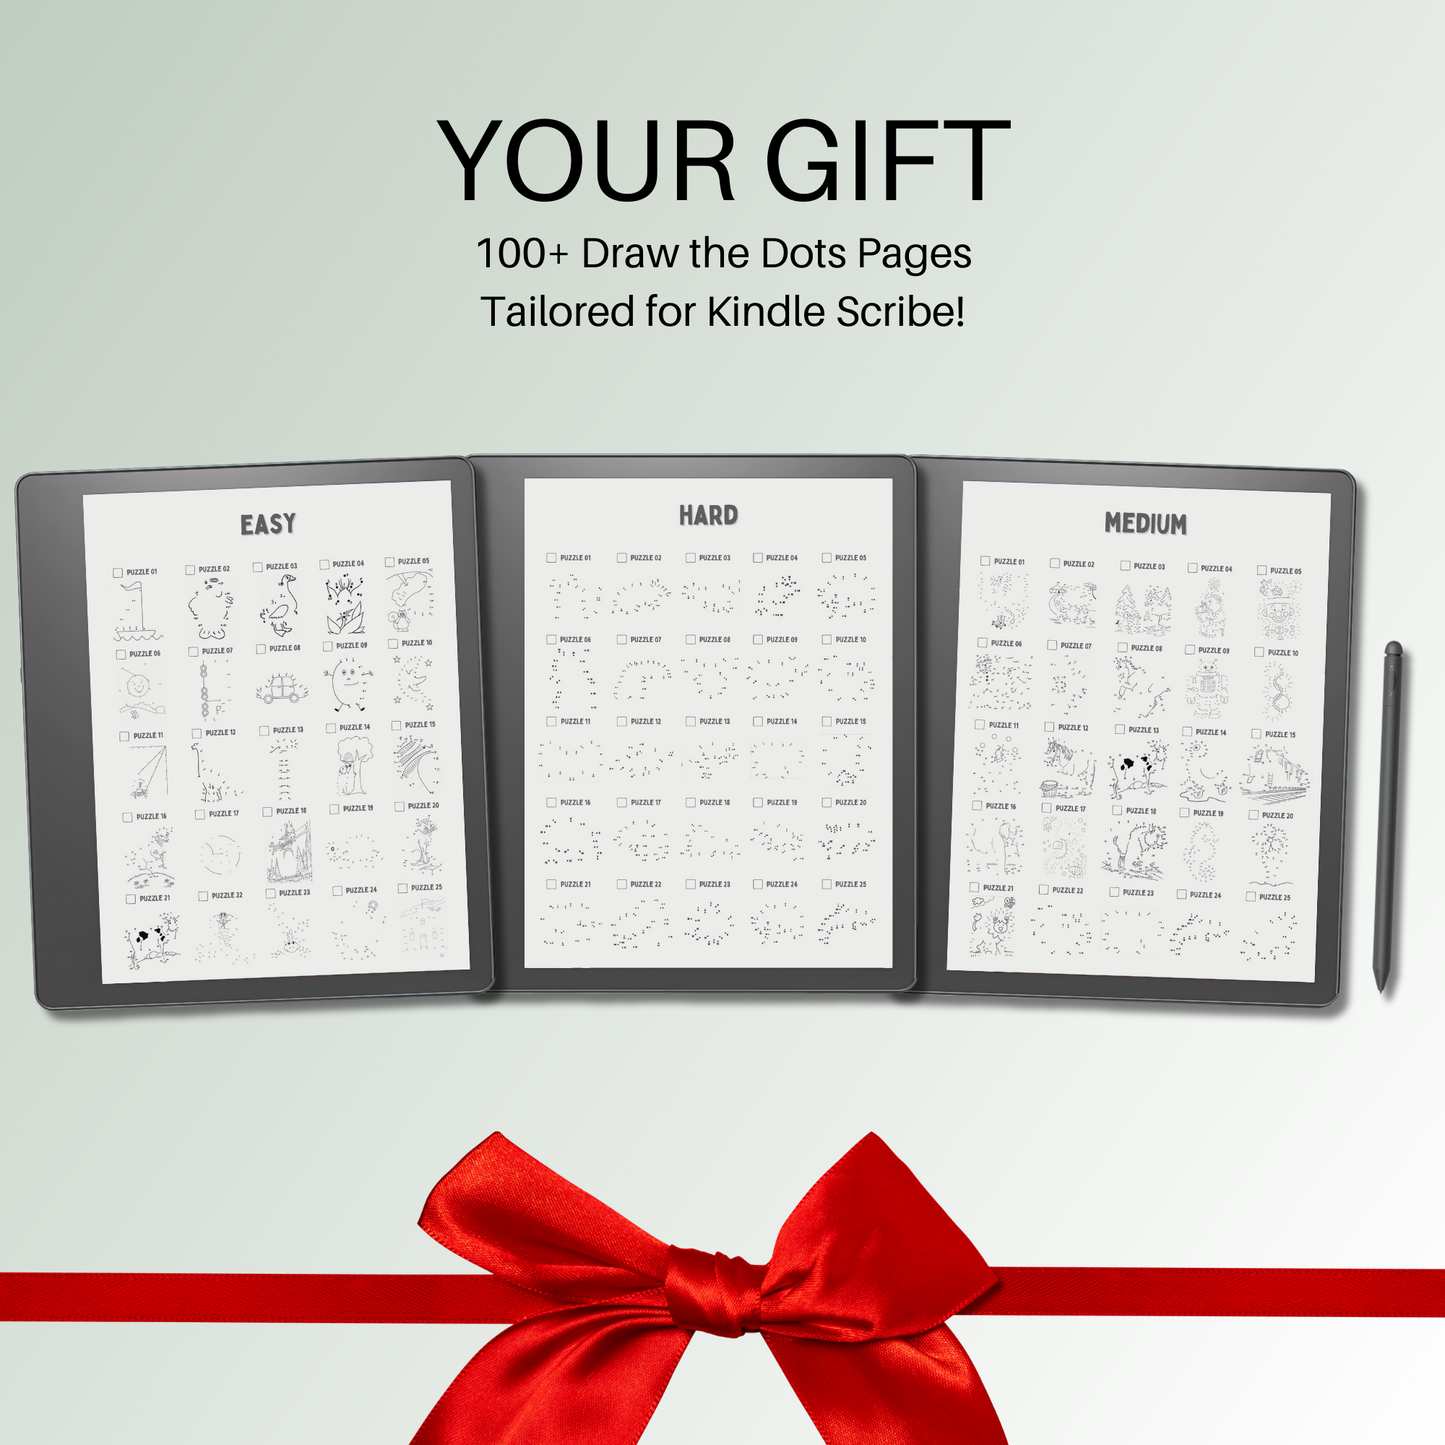 Kindle Scribe Draw the Dots puzzles as Gift.